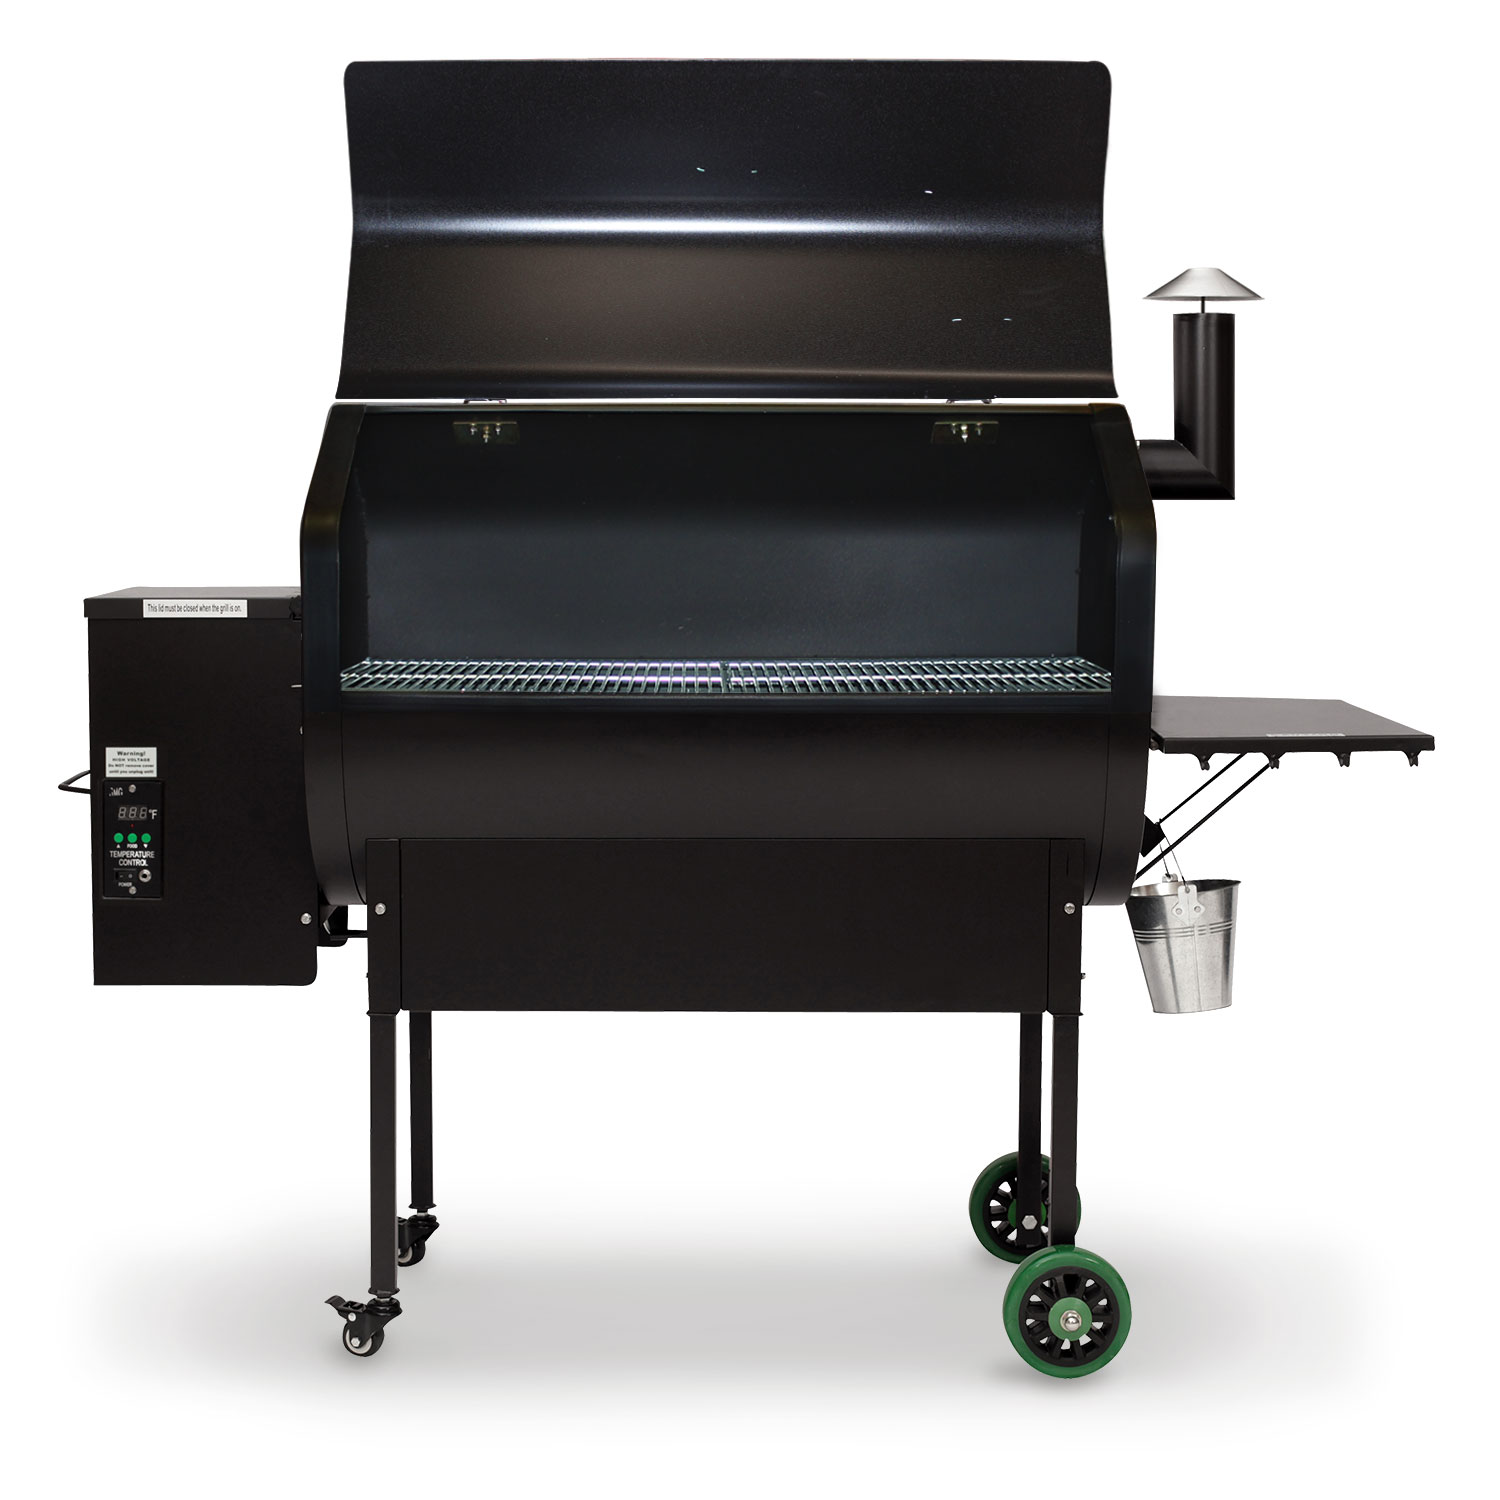 Jim Bowie Green Mountain Grills